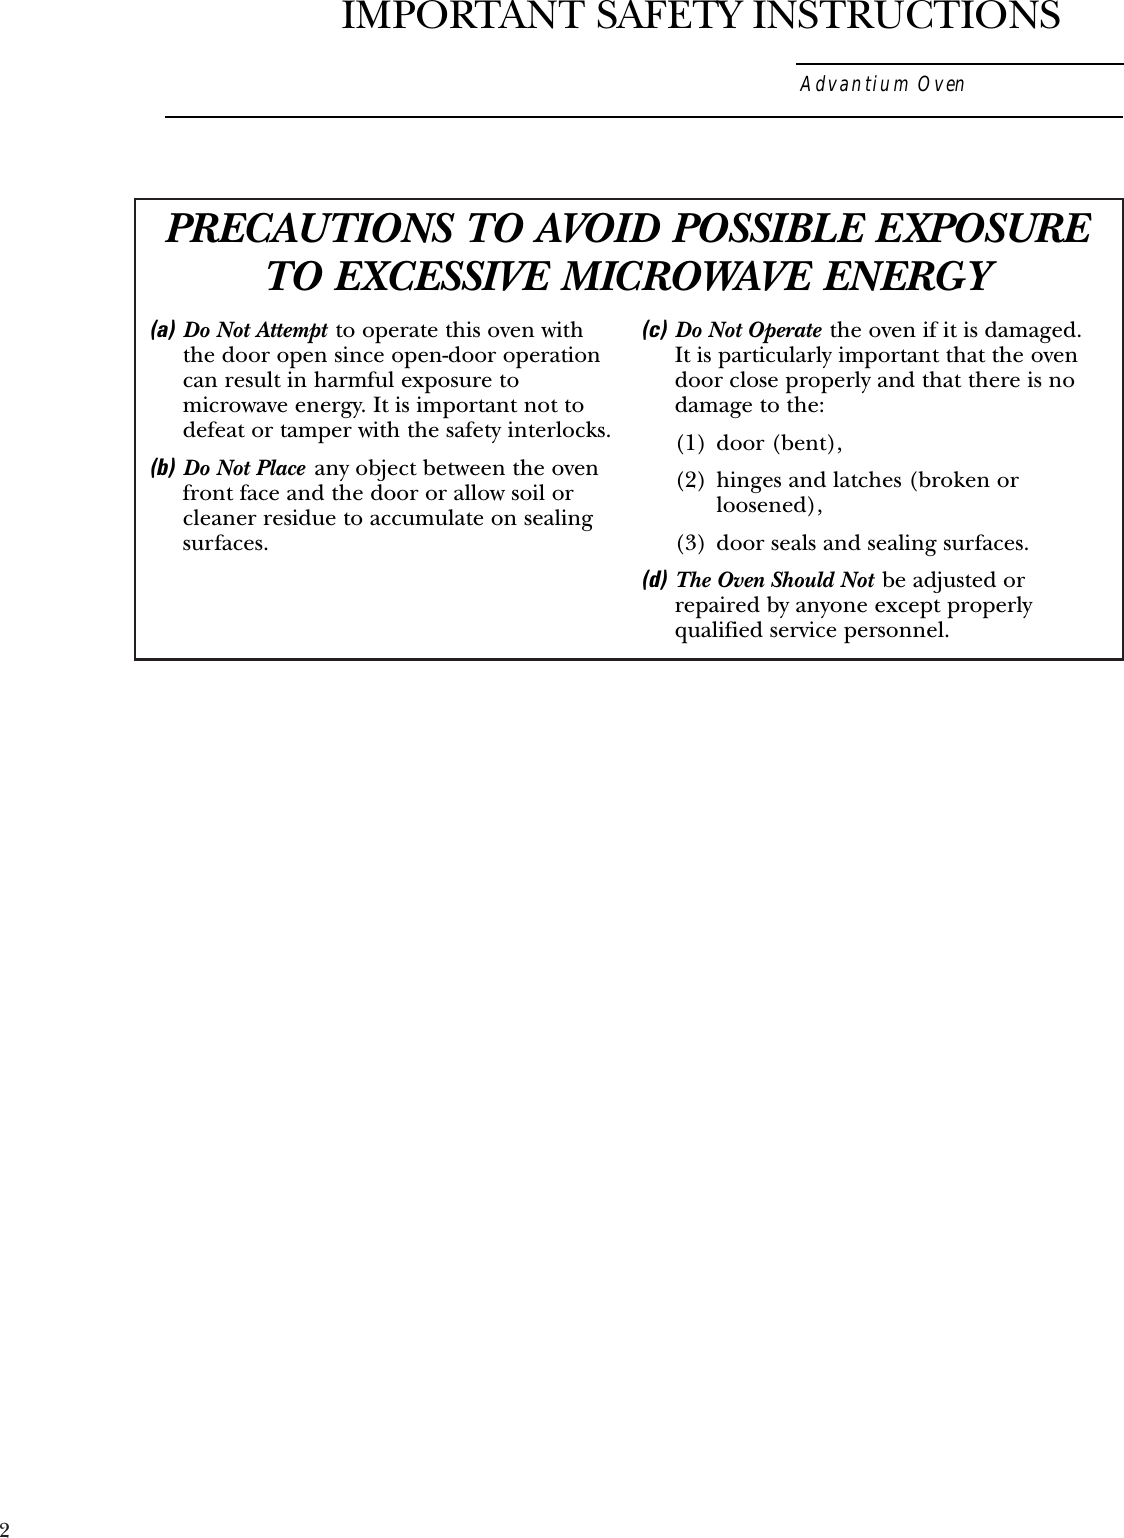 2PRECAUTIONS TO AVOID POSSIBLE EXPOSURETO EXCESSIVE MICROWAVE ENERGY(a) Do Not Attempt to operate this oven withthe door open since open-door operationcan result in harmful exposure tomicrowave energy. It is important not todefeat or tamper with the safety interlocks.(b) Do Not Place any object between the ovenfront face and the door or allow soil orcleaner residue to accumulate on sealingsurfaces.(c) Do Not Operate the oven if it is damaged. It is particularly important that the ovendoor close properly and that there is nodamage to the:(1) door (bent),(2)  hinges and latches (broken orloosened),(3)  door seals and sealing surfaces.(d) The Oven Should Not be adjusted orrepaired by anyone except properlyqualified service personnel.Advantium OvenIMPORTANT SAFETY INSTRUCTIONS